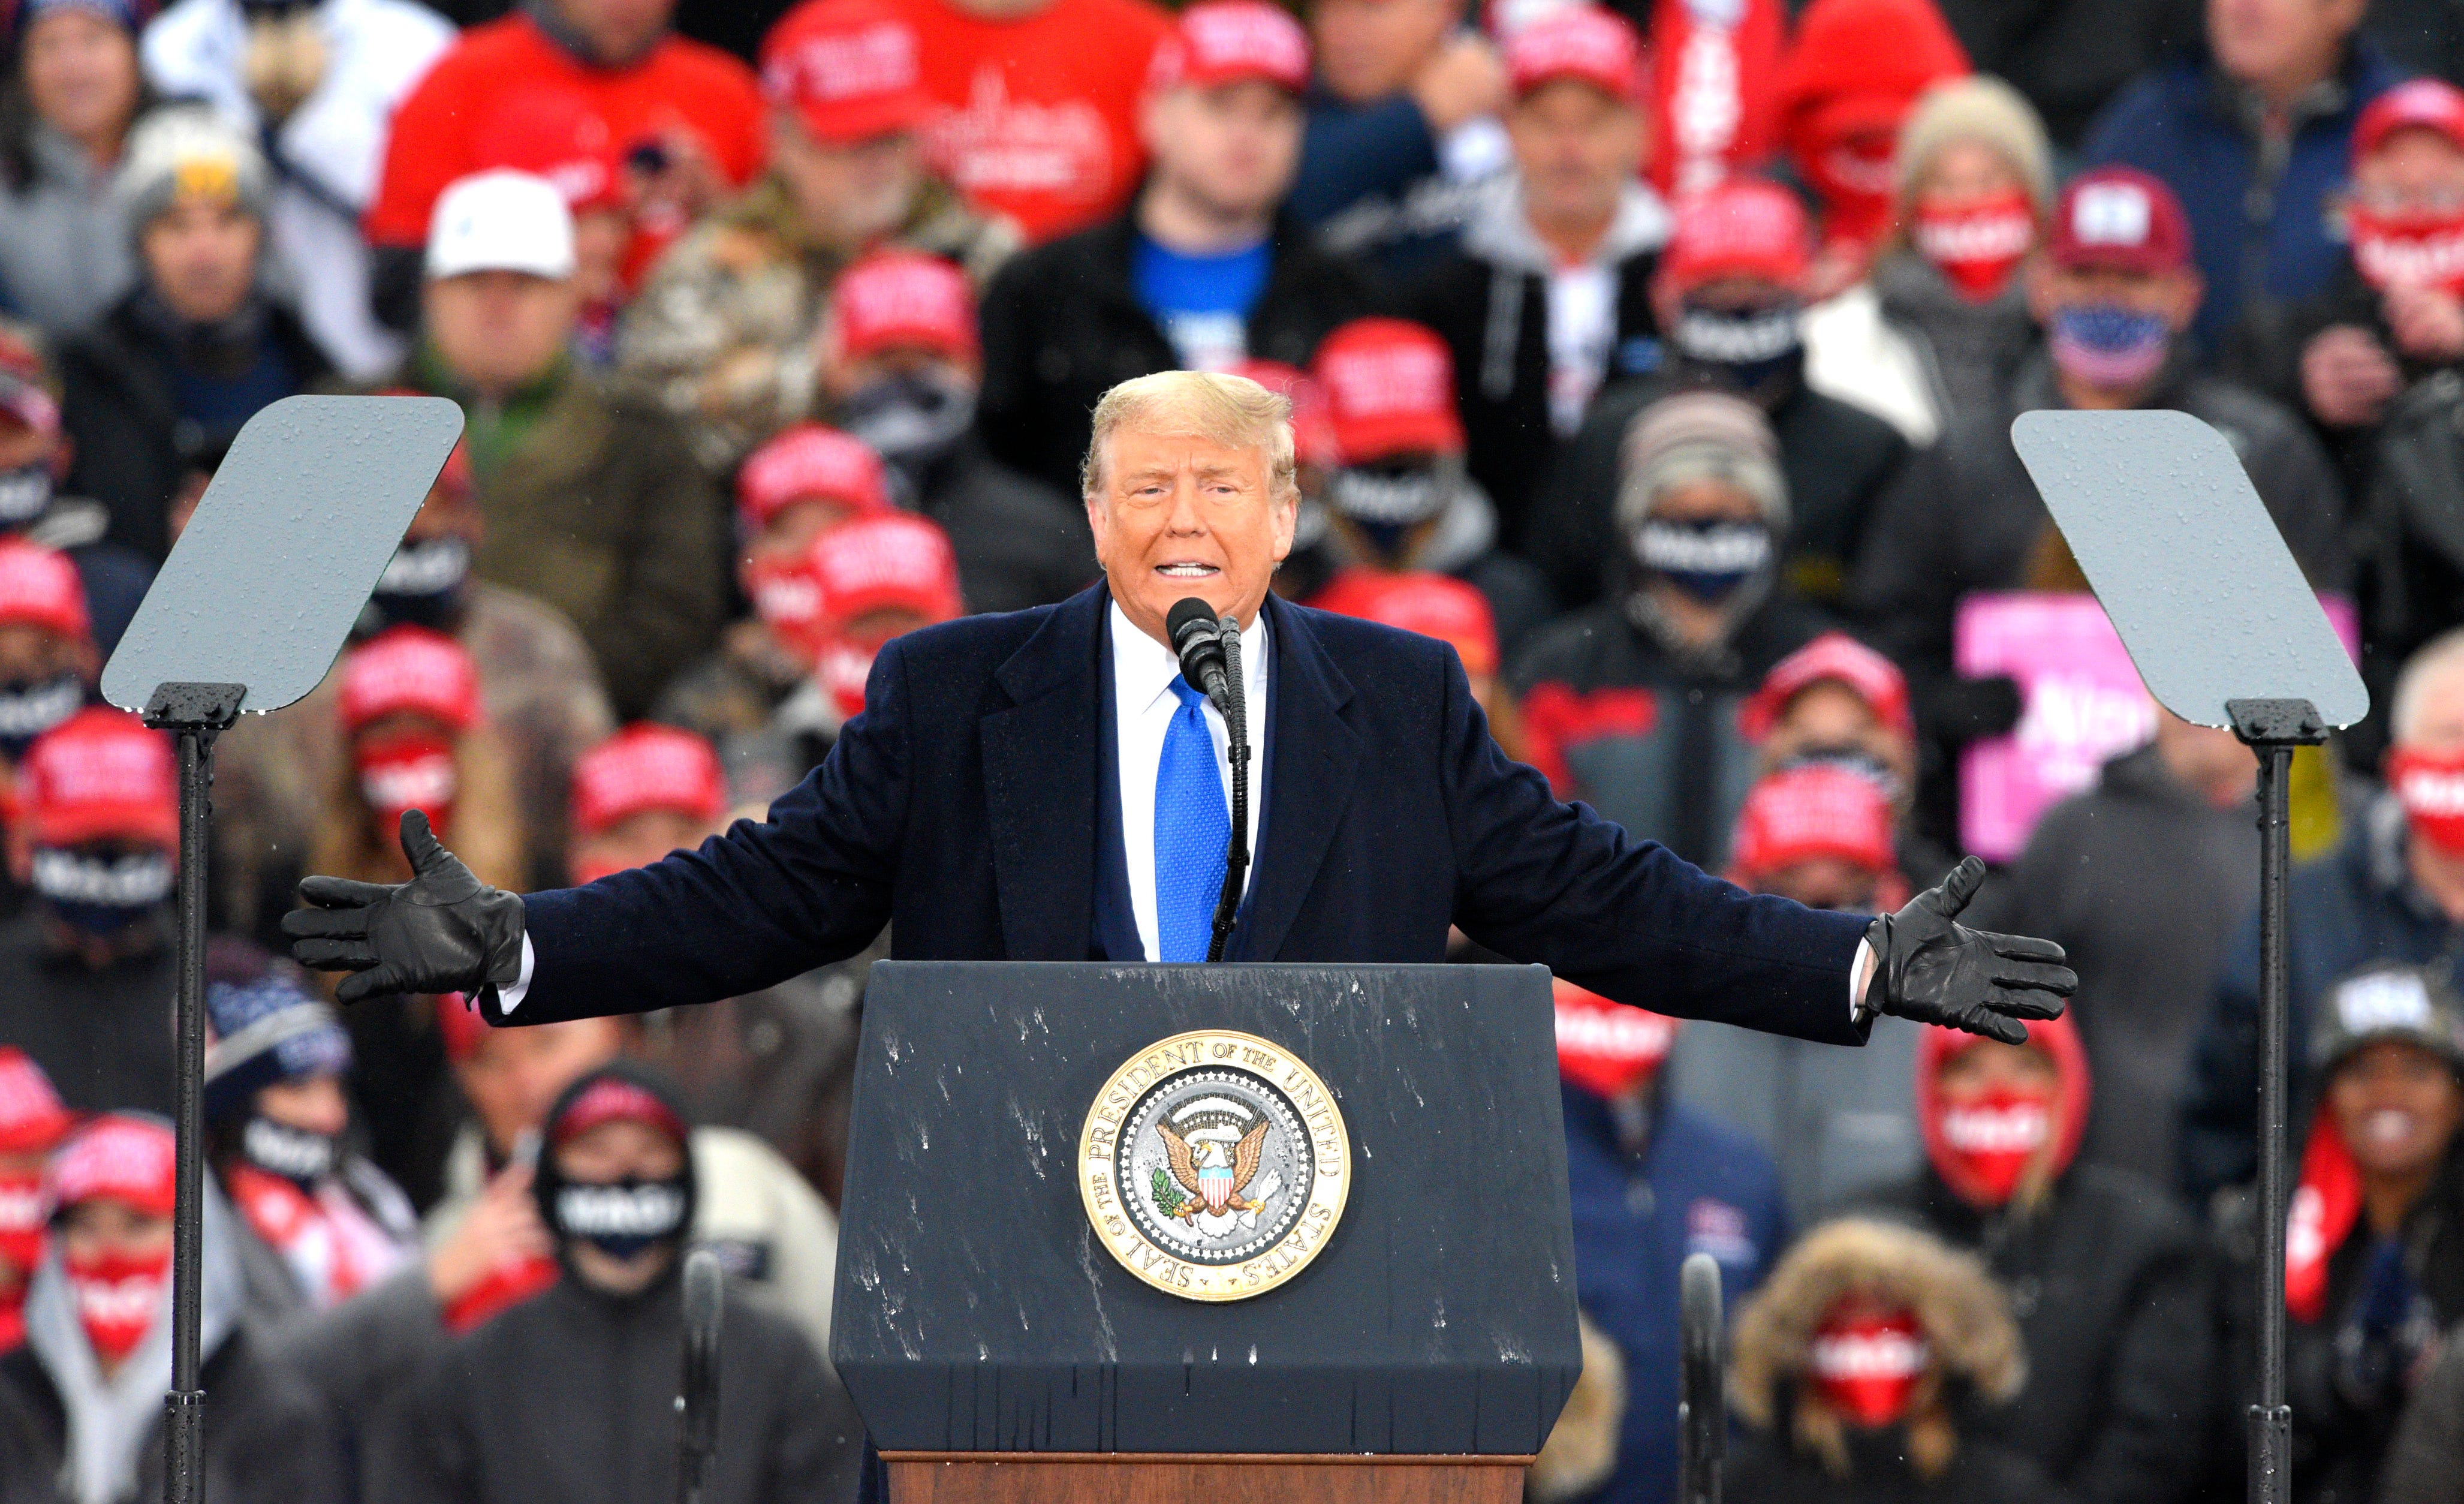 President Donald Trump addresses his supporters during a campaign rally at the Capital Region International Airport in Lansing, Tuesday.